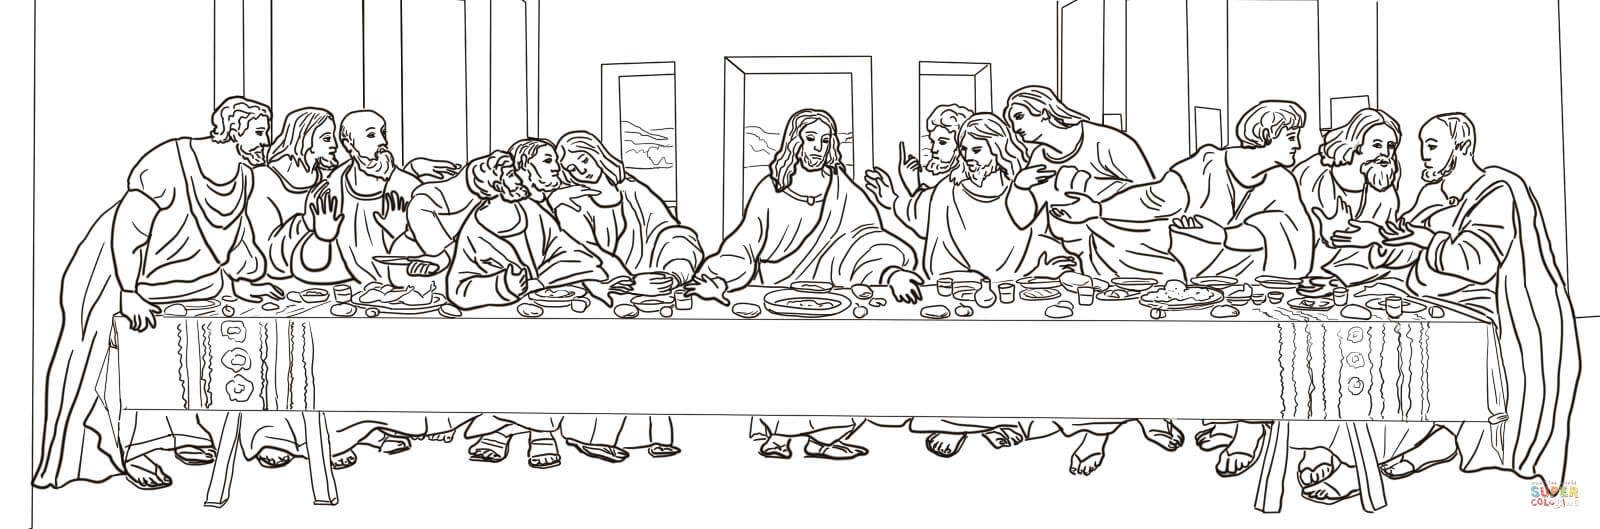 The last supper by leonardo da vinci coloring page free printable coloring pages